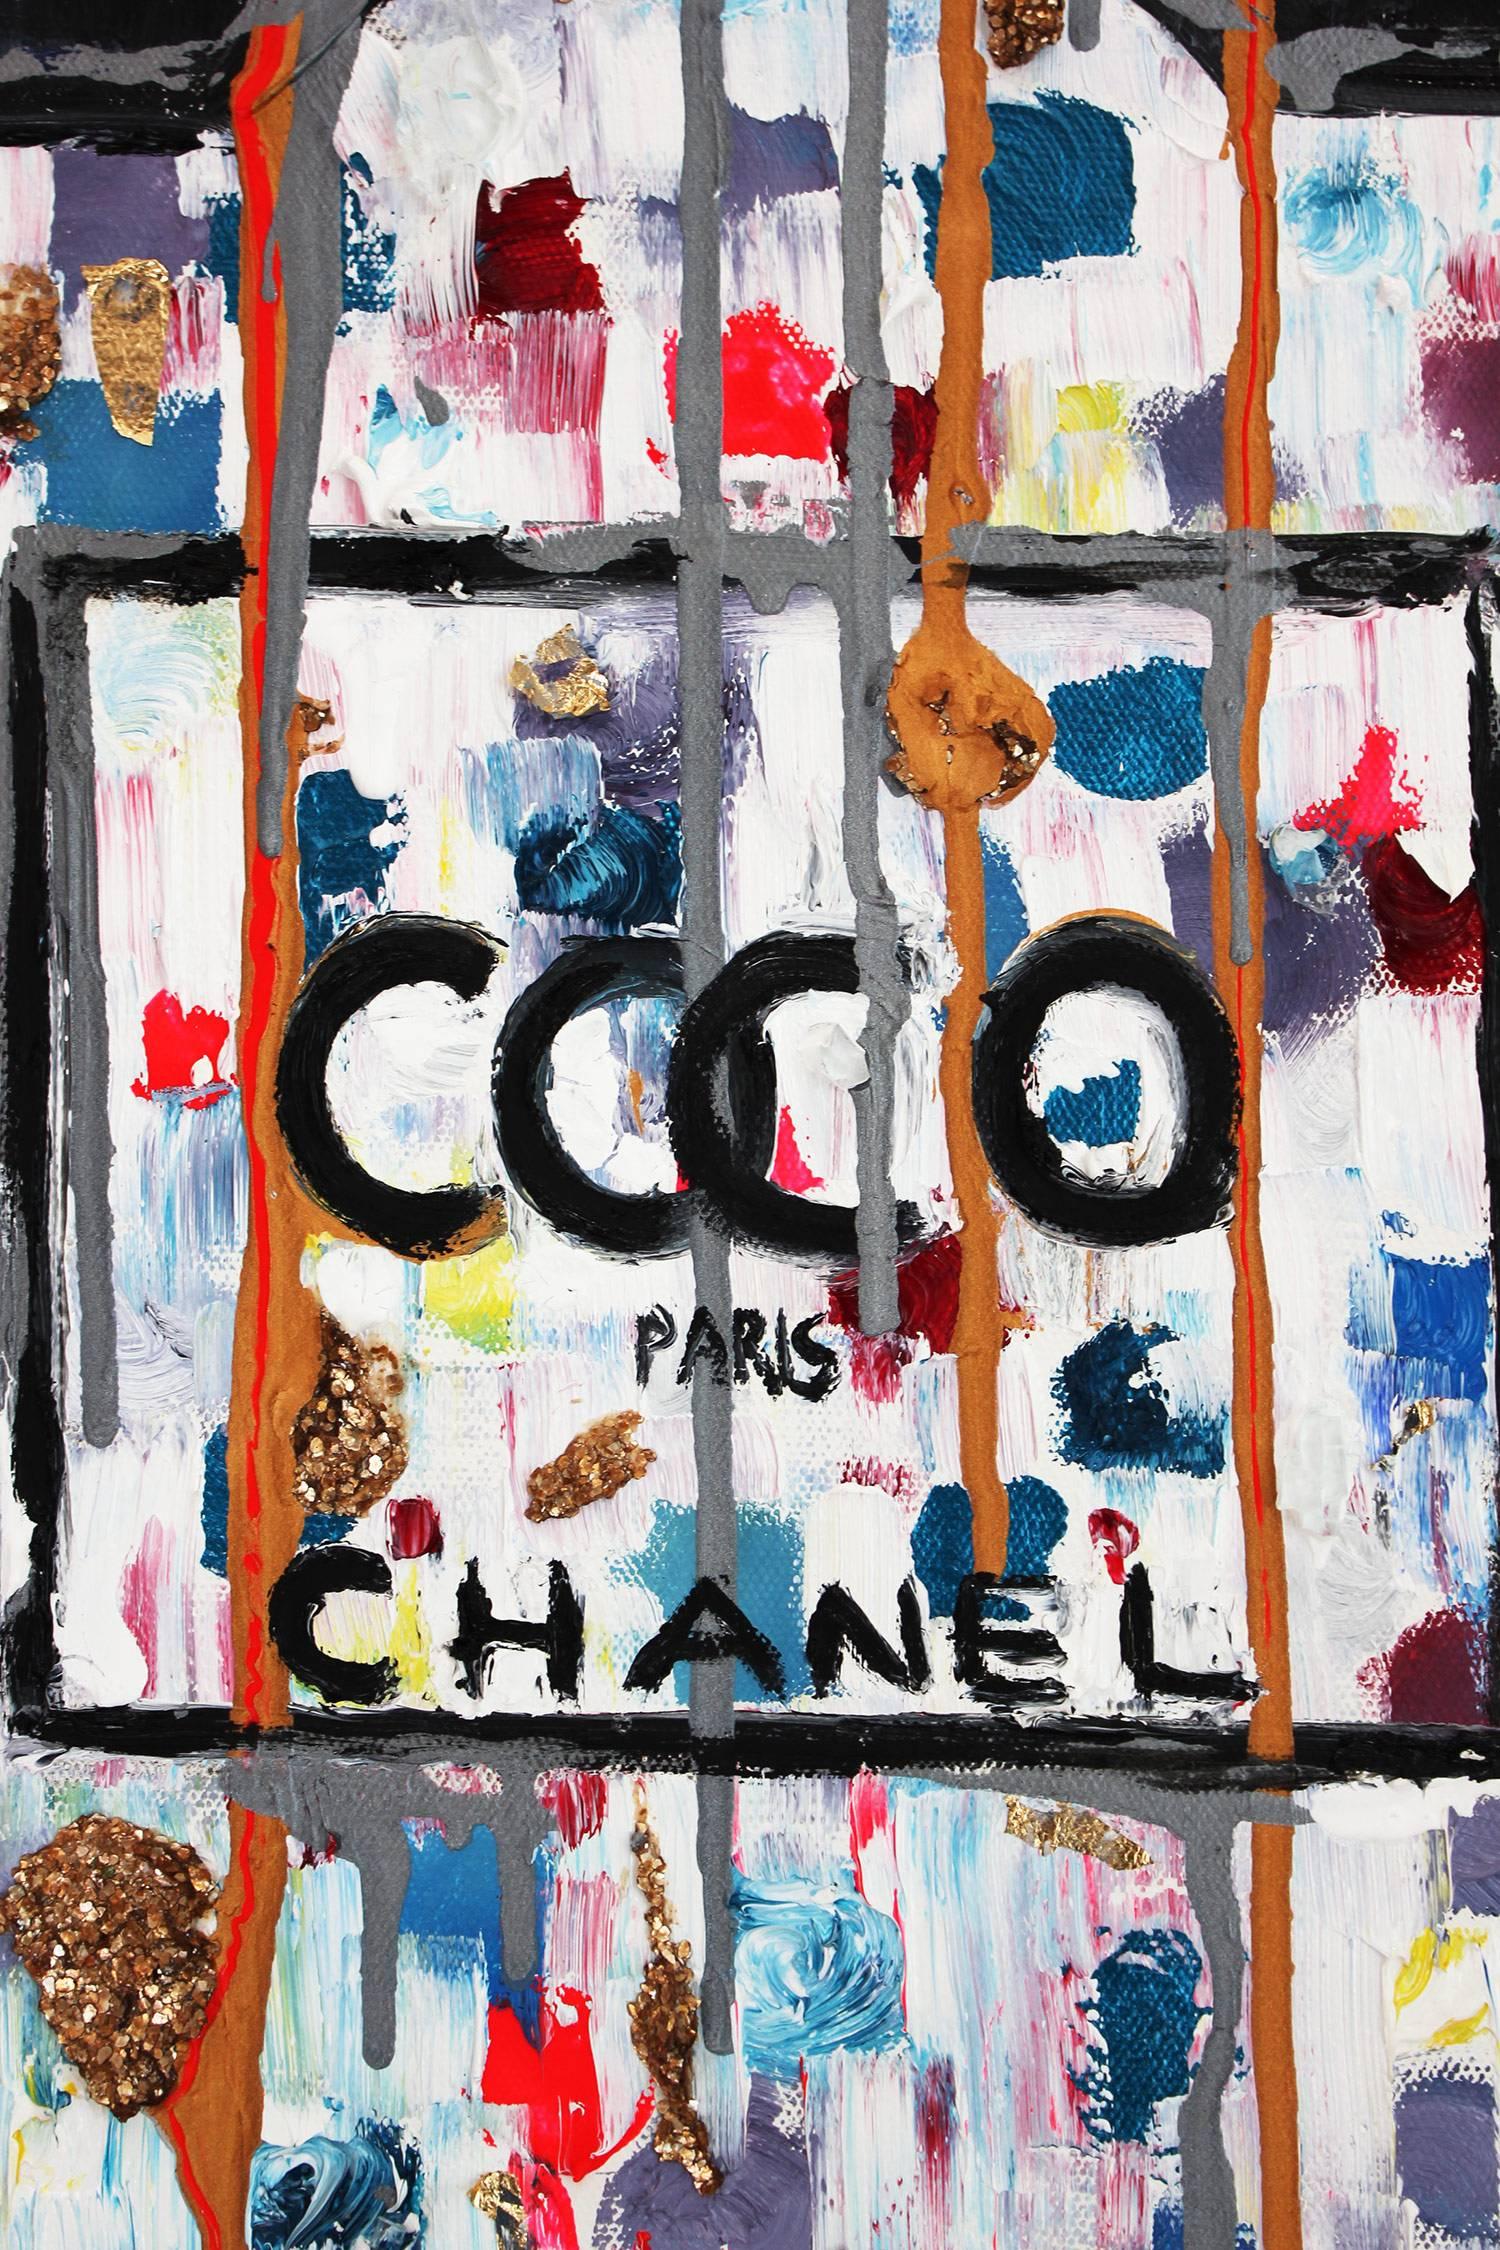 Dripping Dots, Loco for Coco - Painting by Cindy Shaoul